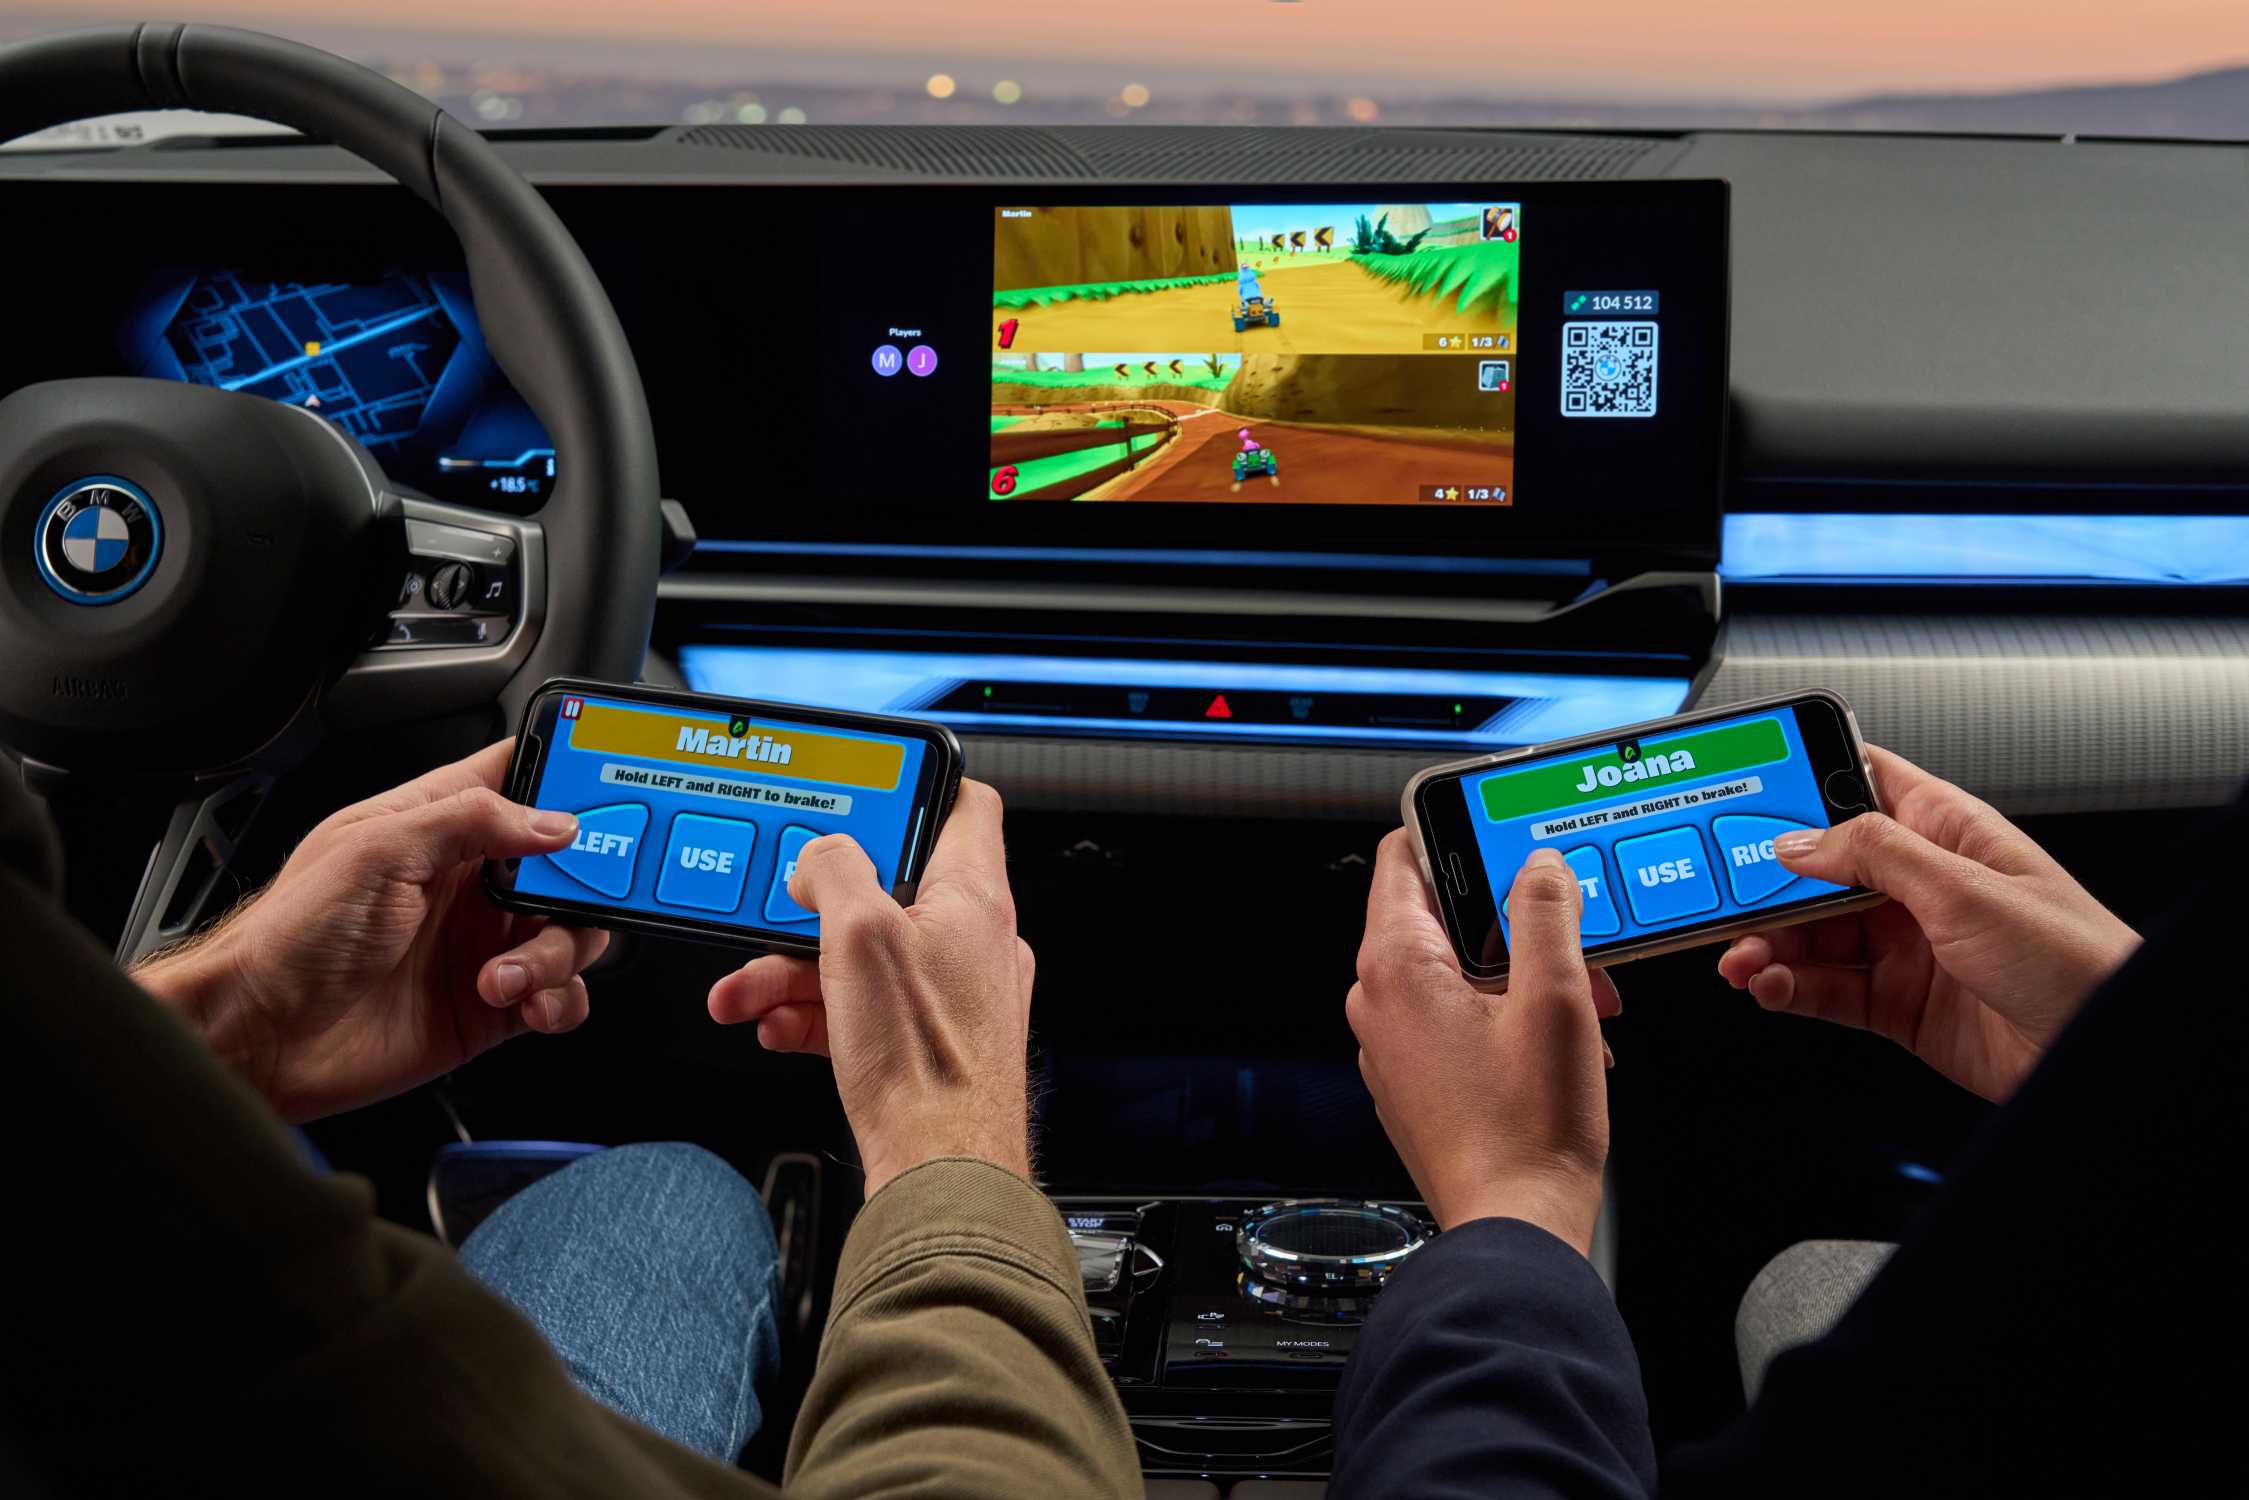 New BMW 5 Series launches with AirConsole gaming platform.